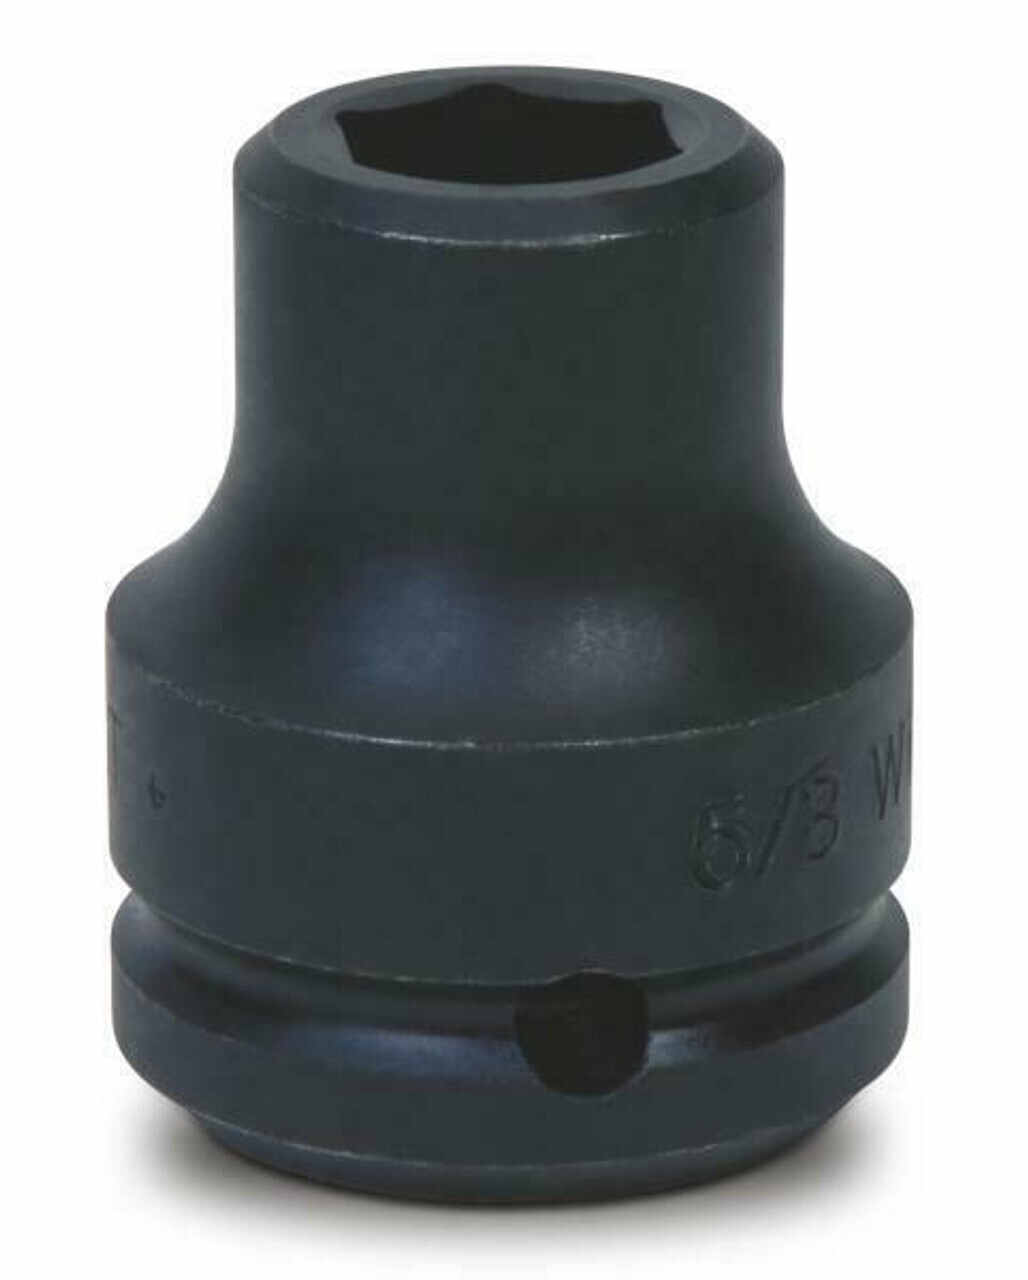 SAE Black Industrial Finish,Williams 1/2" Drive Shallow Impact Socket,12 Point 